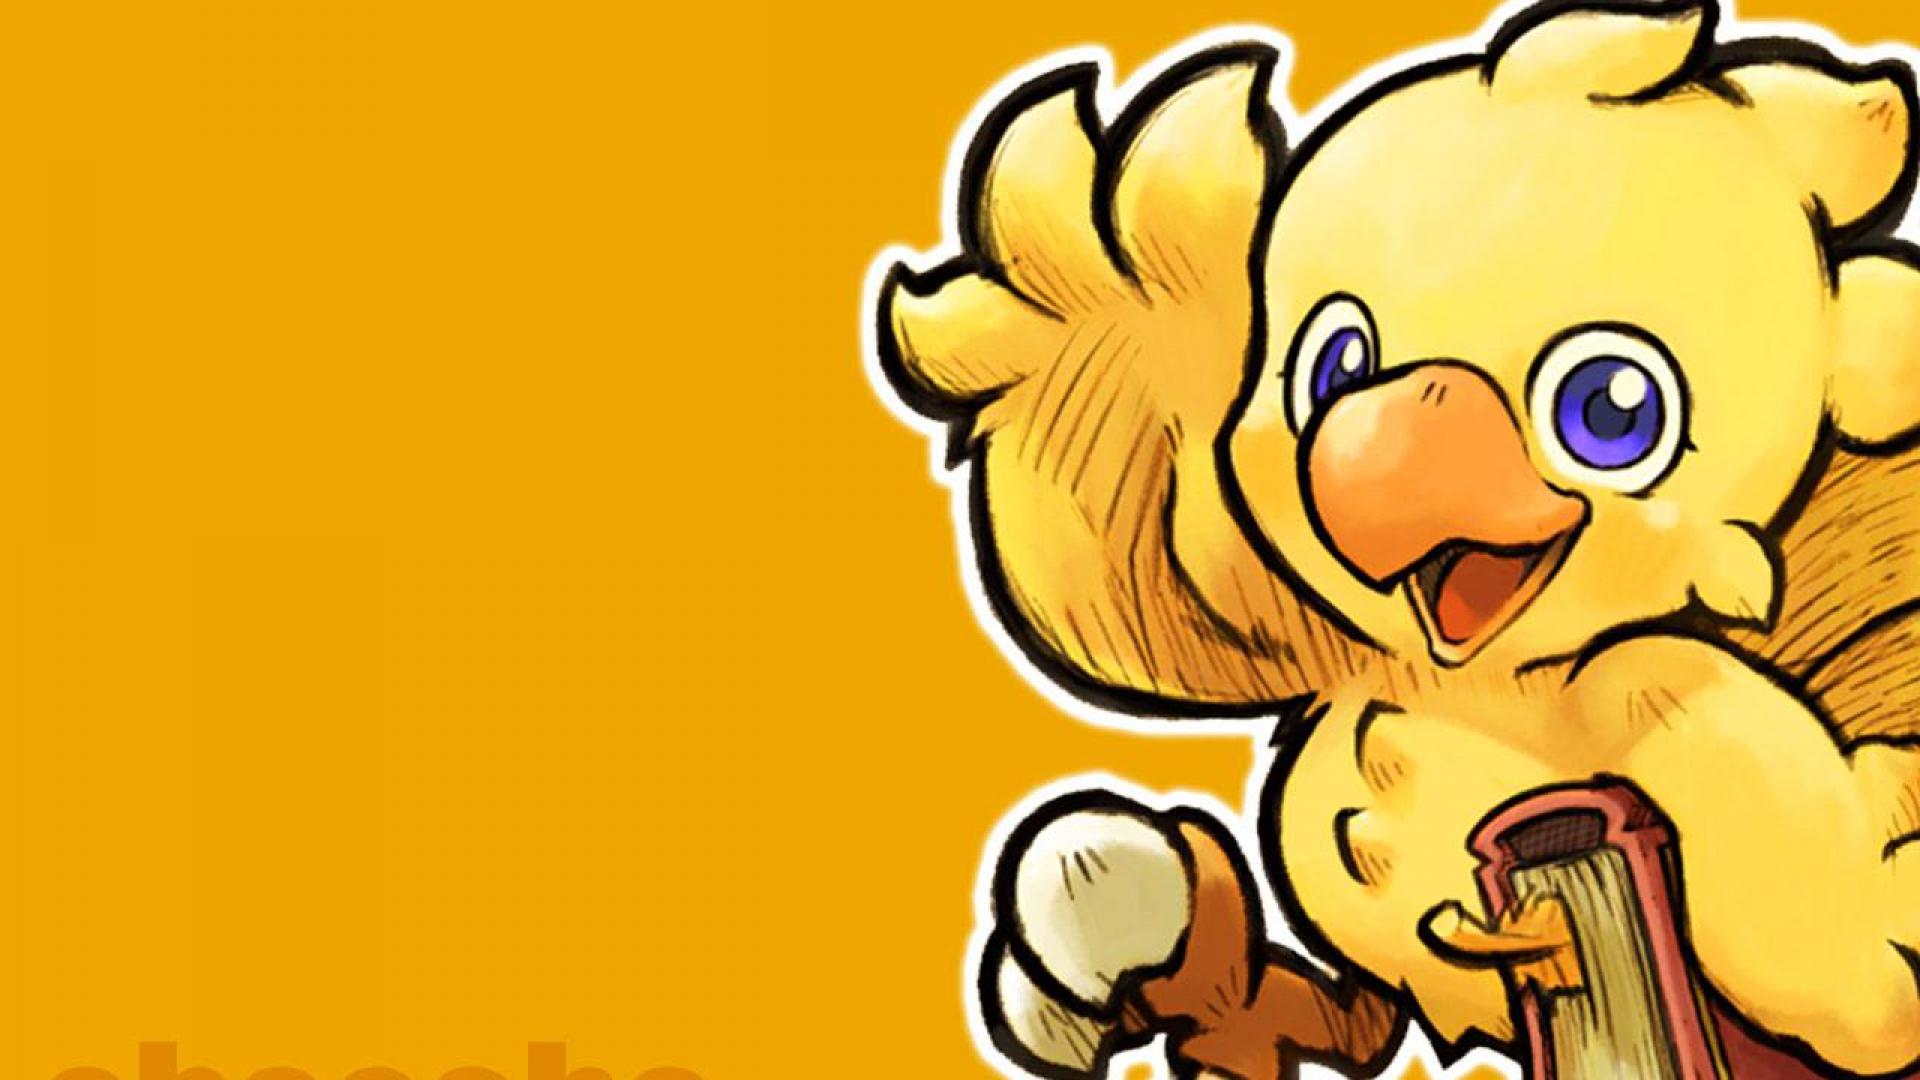 Chocobo Wallpaper High Quality And Resolution